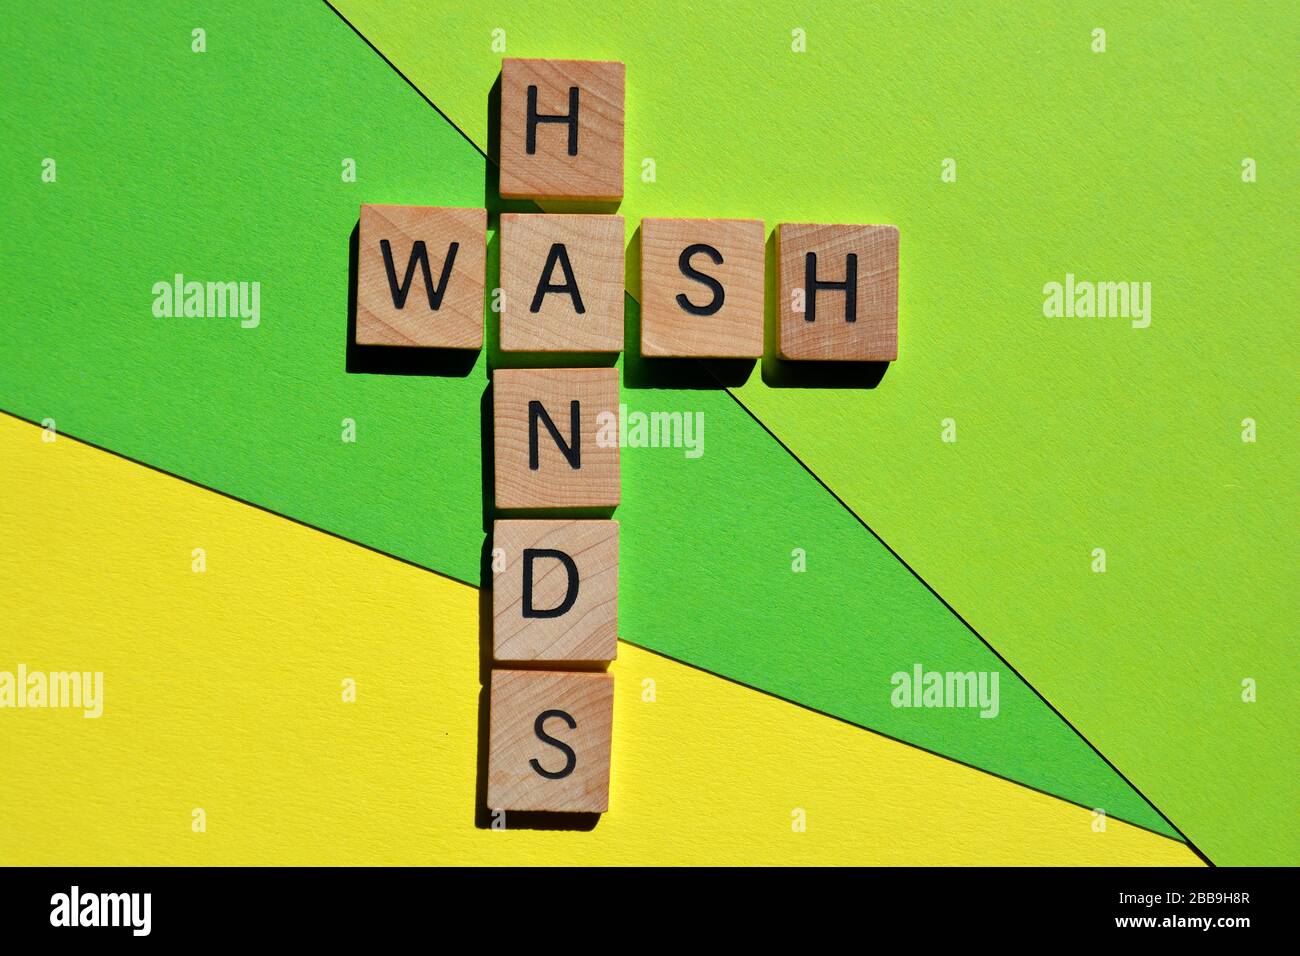 Wash Hands, words on green background Stock Photo